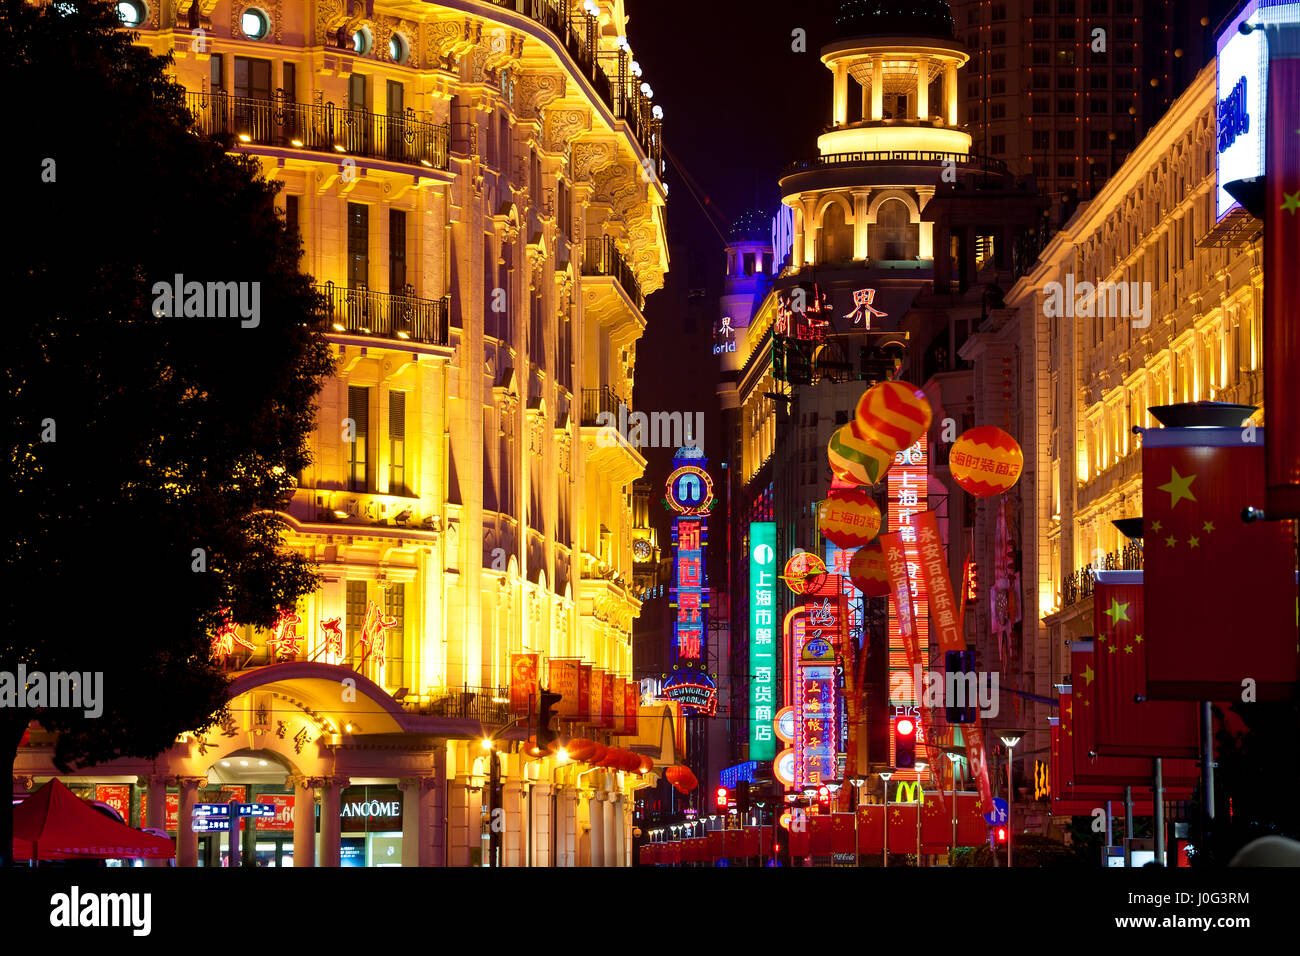 Buildings lit up at night with Chinese flags, Nanjing Road, Shanghai, China Stock Photo